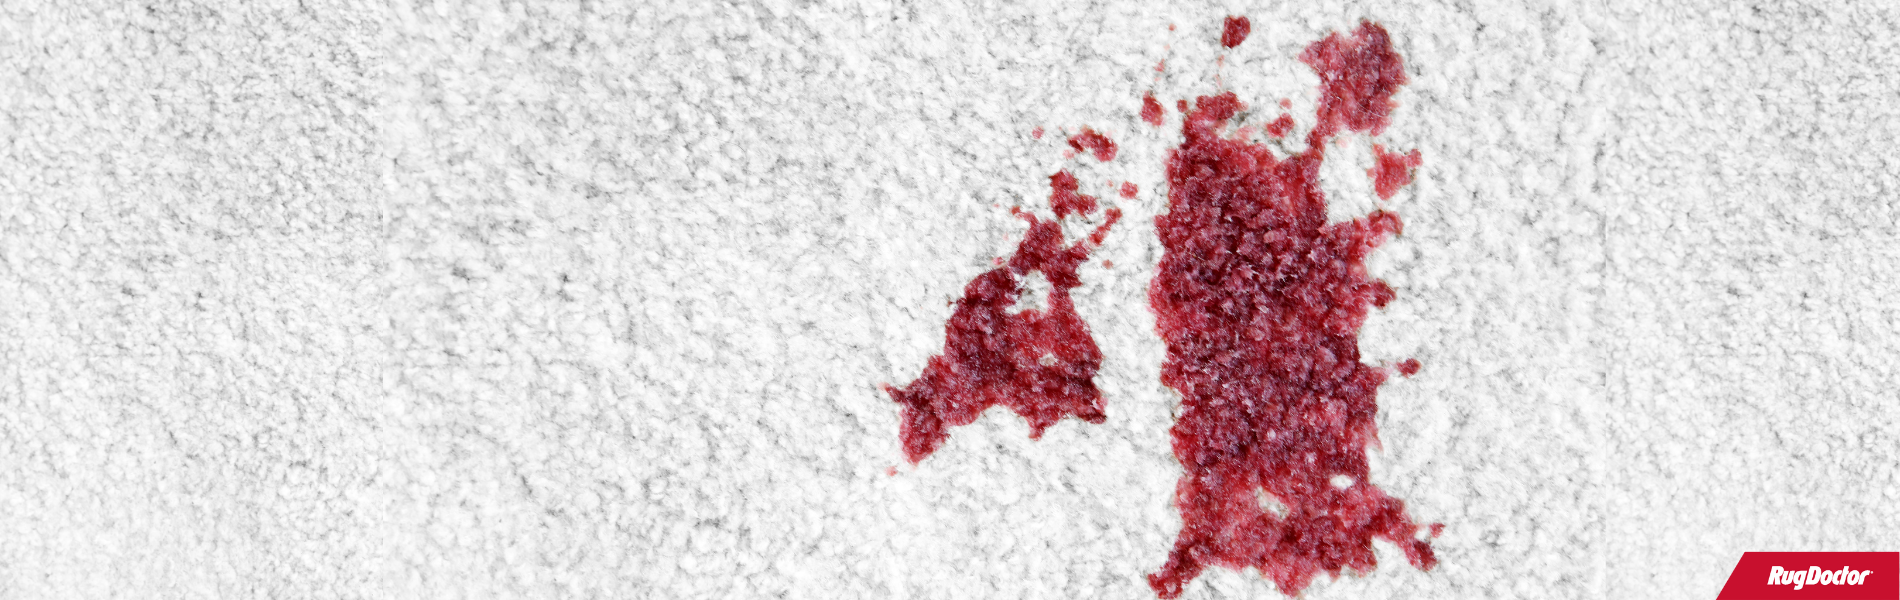 Quick Tip: How to Remove Blood Stains